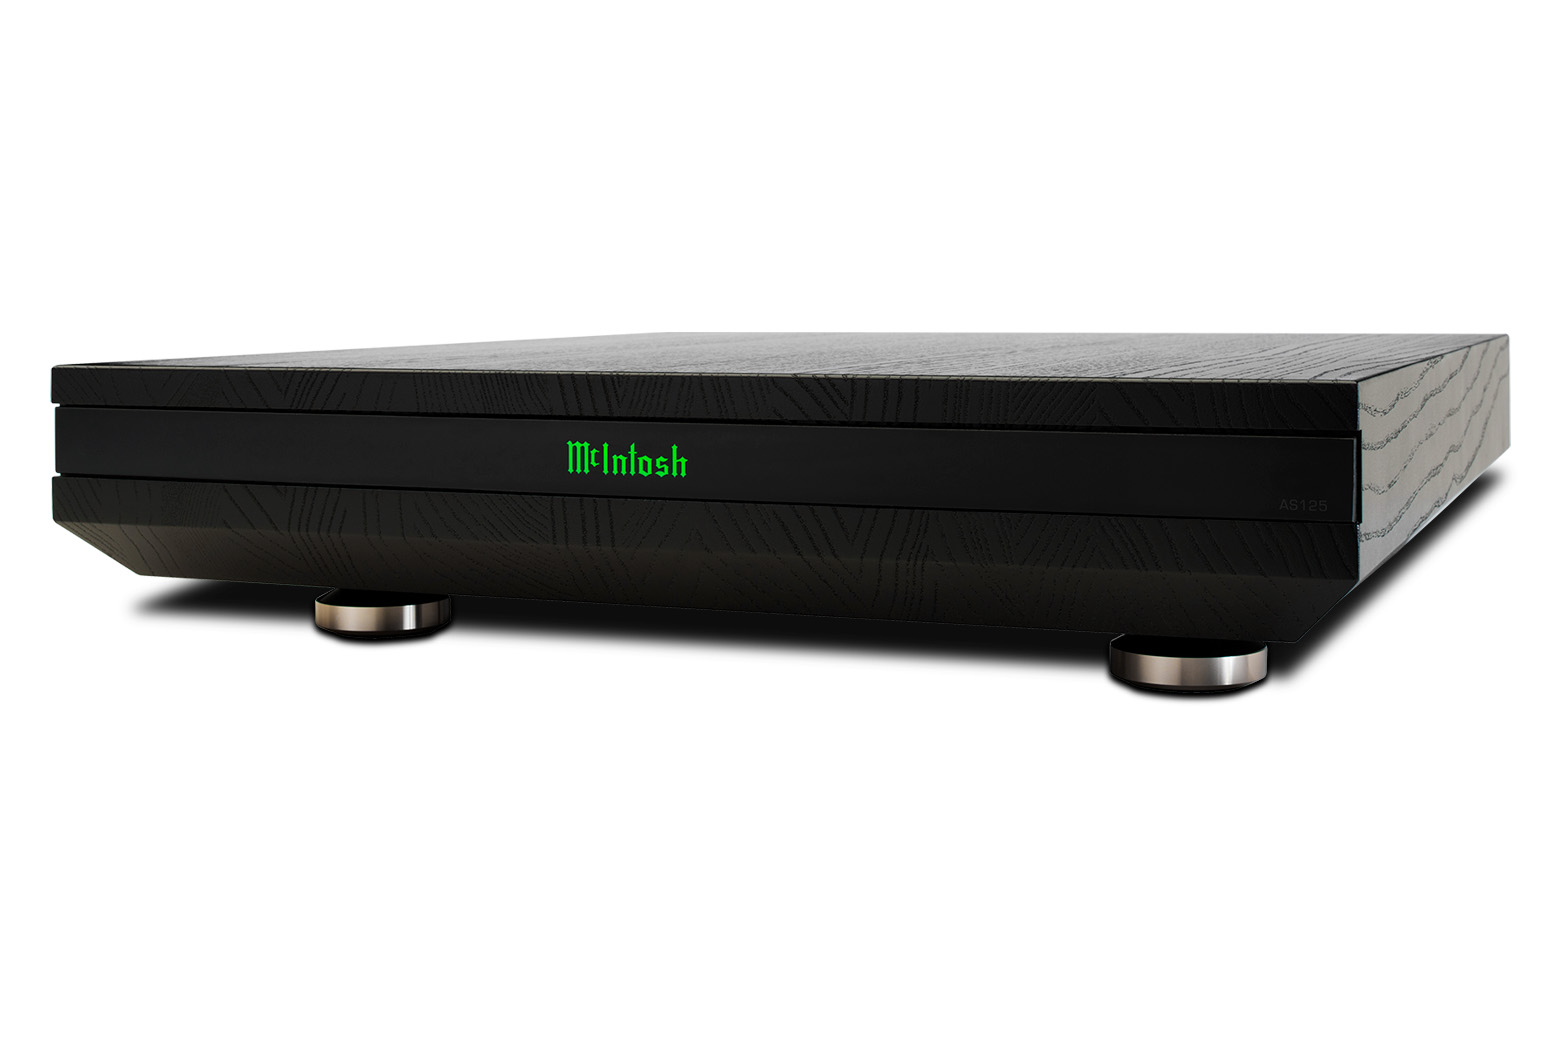 McIntosh AS125 Amplifier Stand